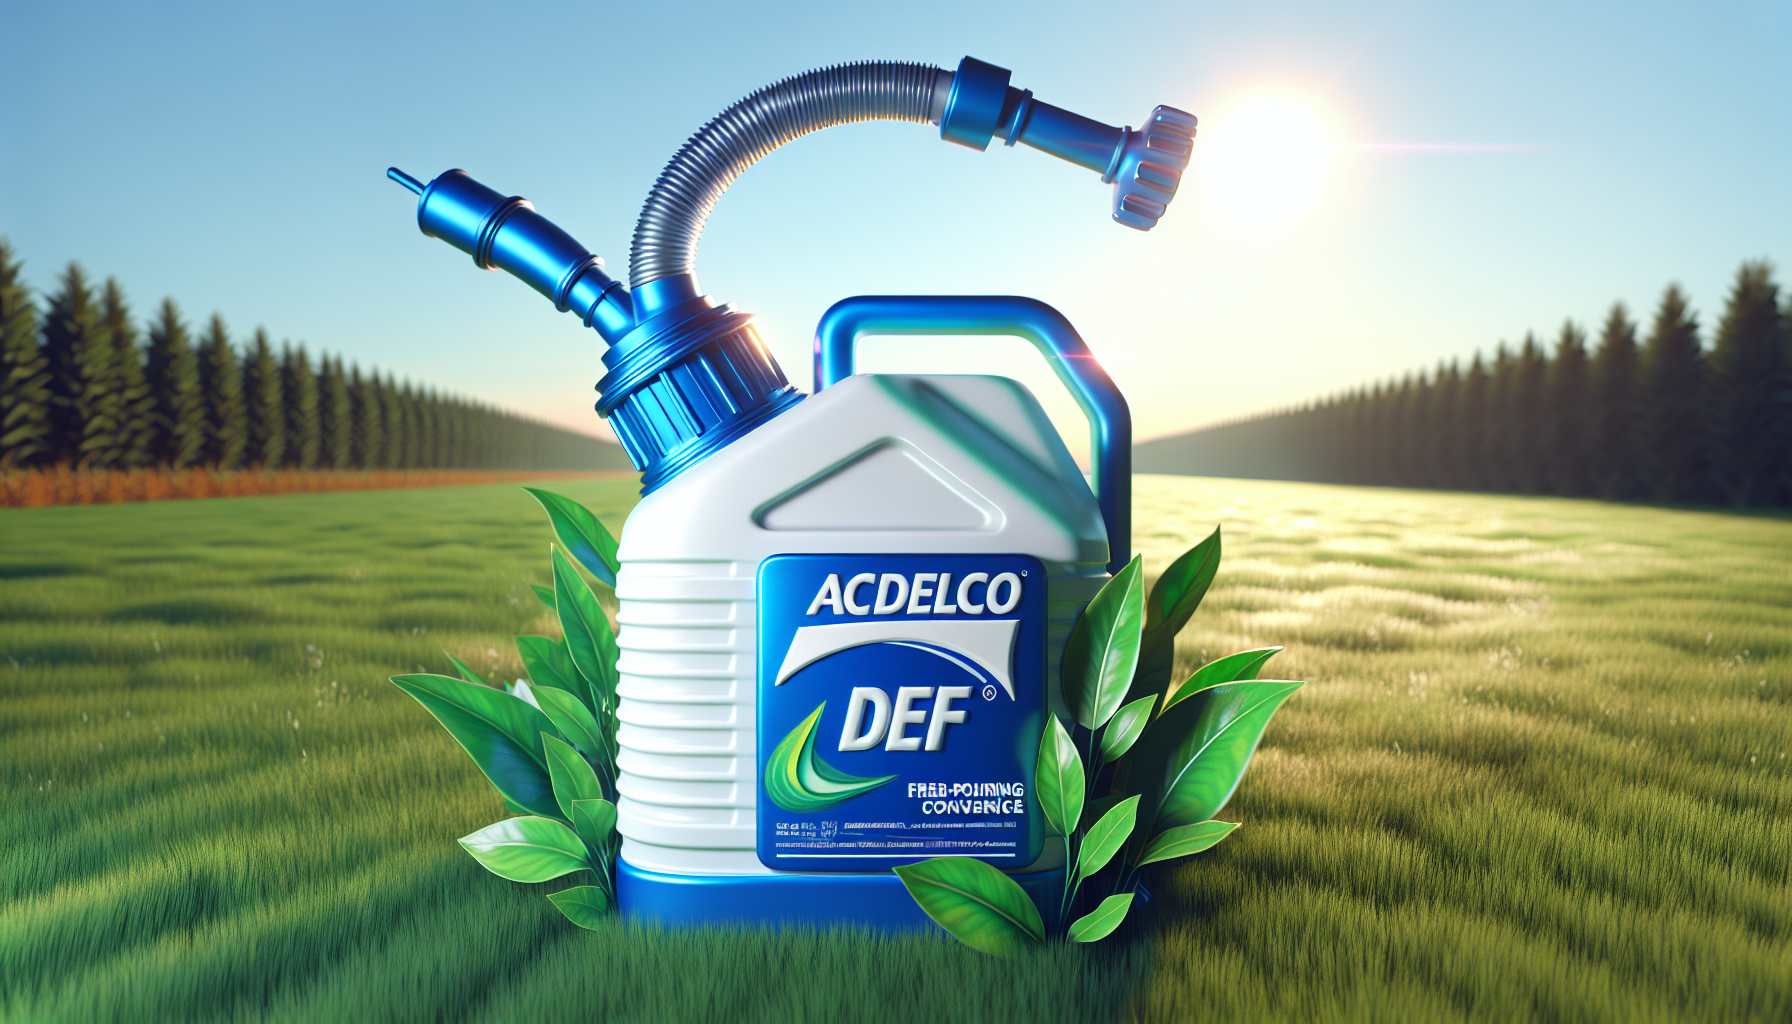 ACDelco DEF container with free pouring nozzle